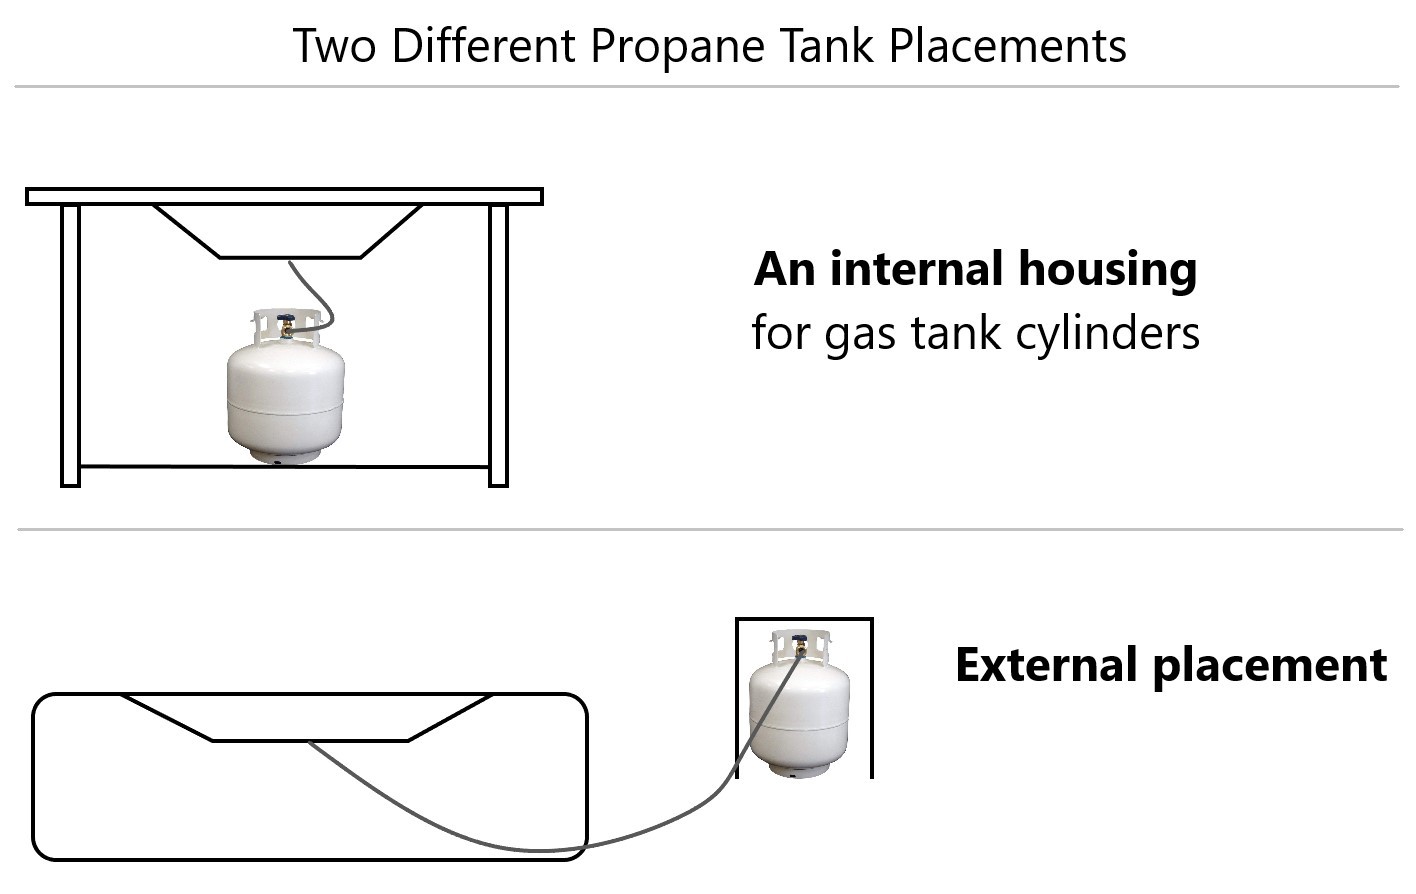 Two different propane tank placements